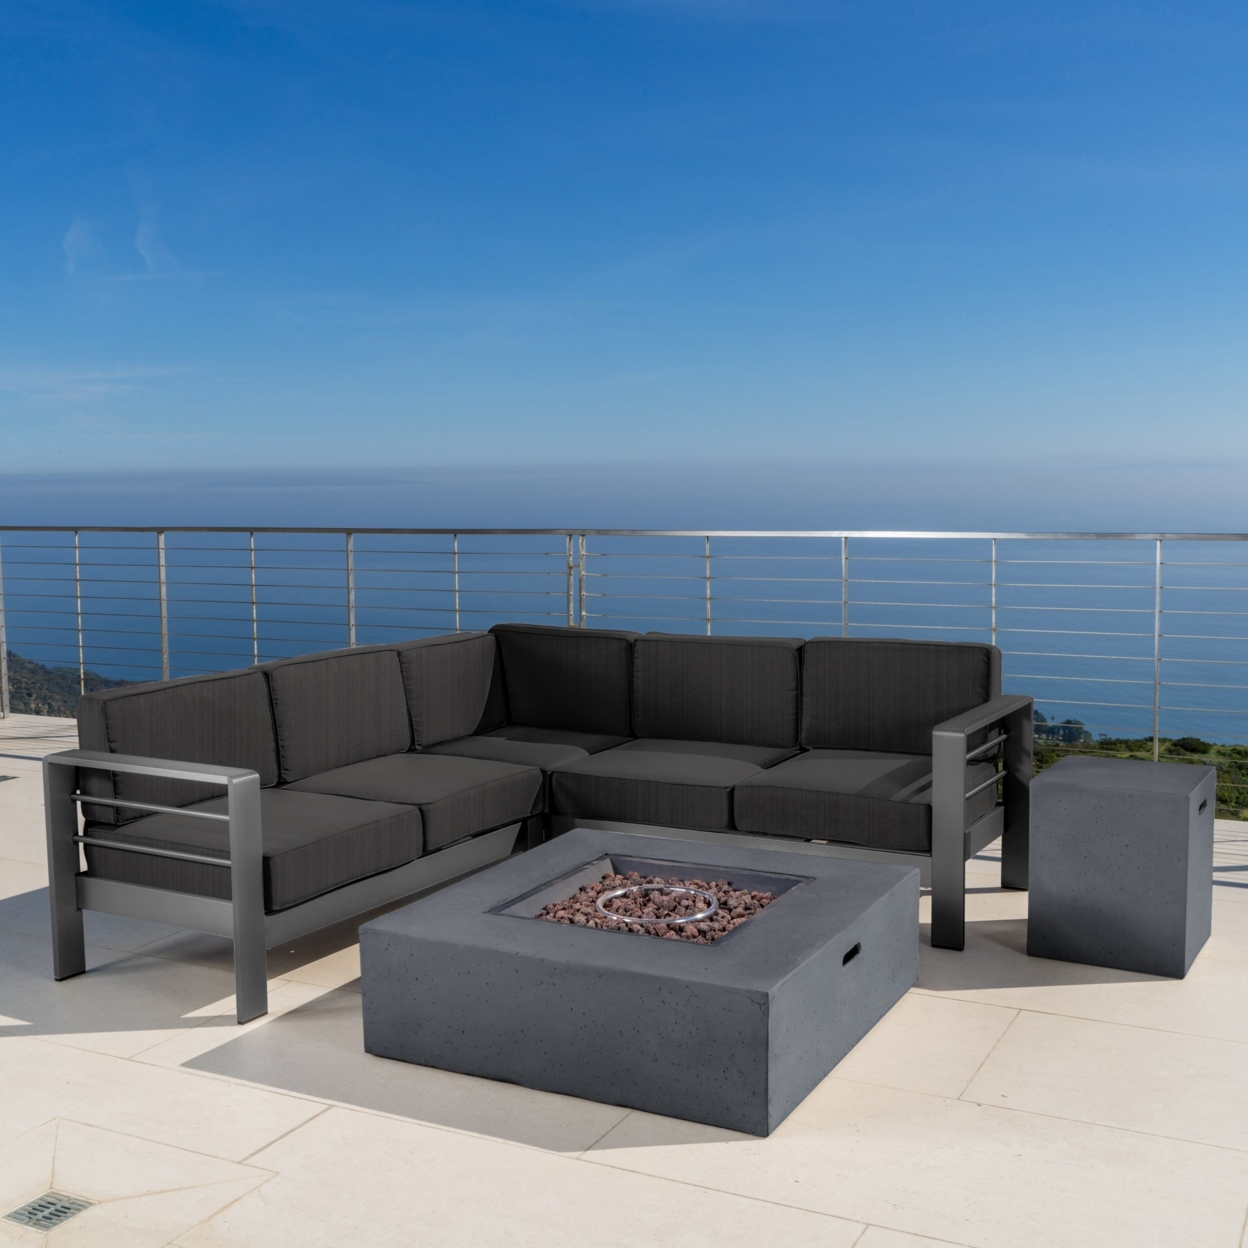 Coral Bay Outdoor Grey Aluminum 5 Piece V-Shape Sectional Sofa Set With Fire Table - Dark Grey